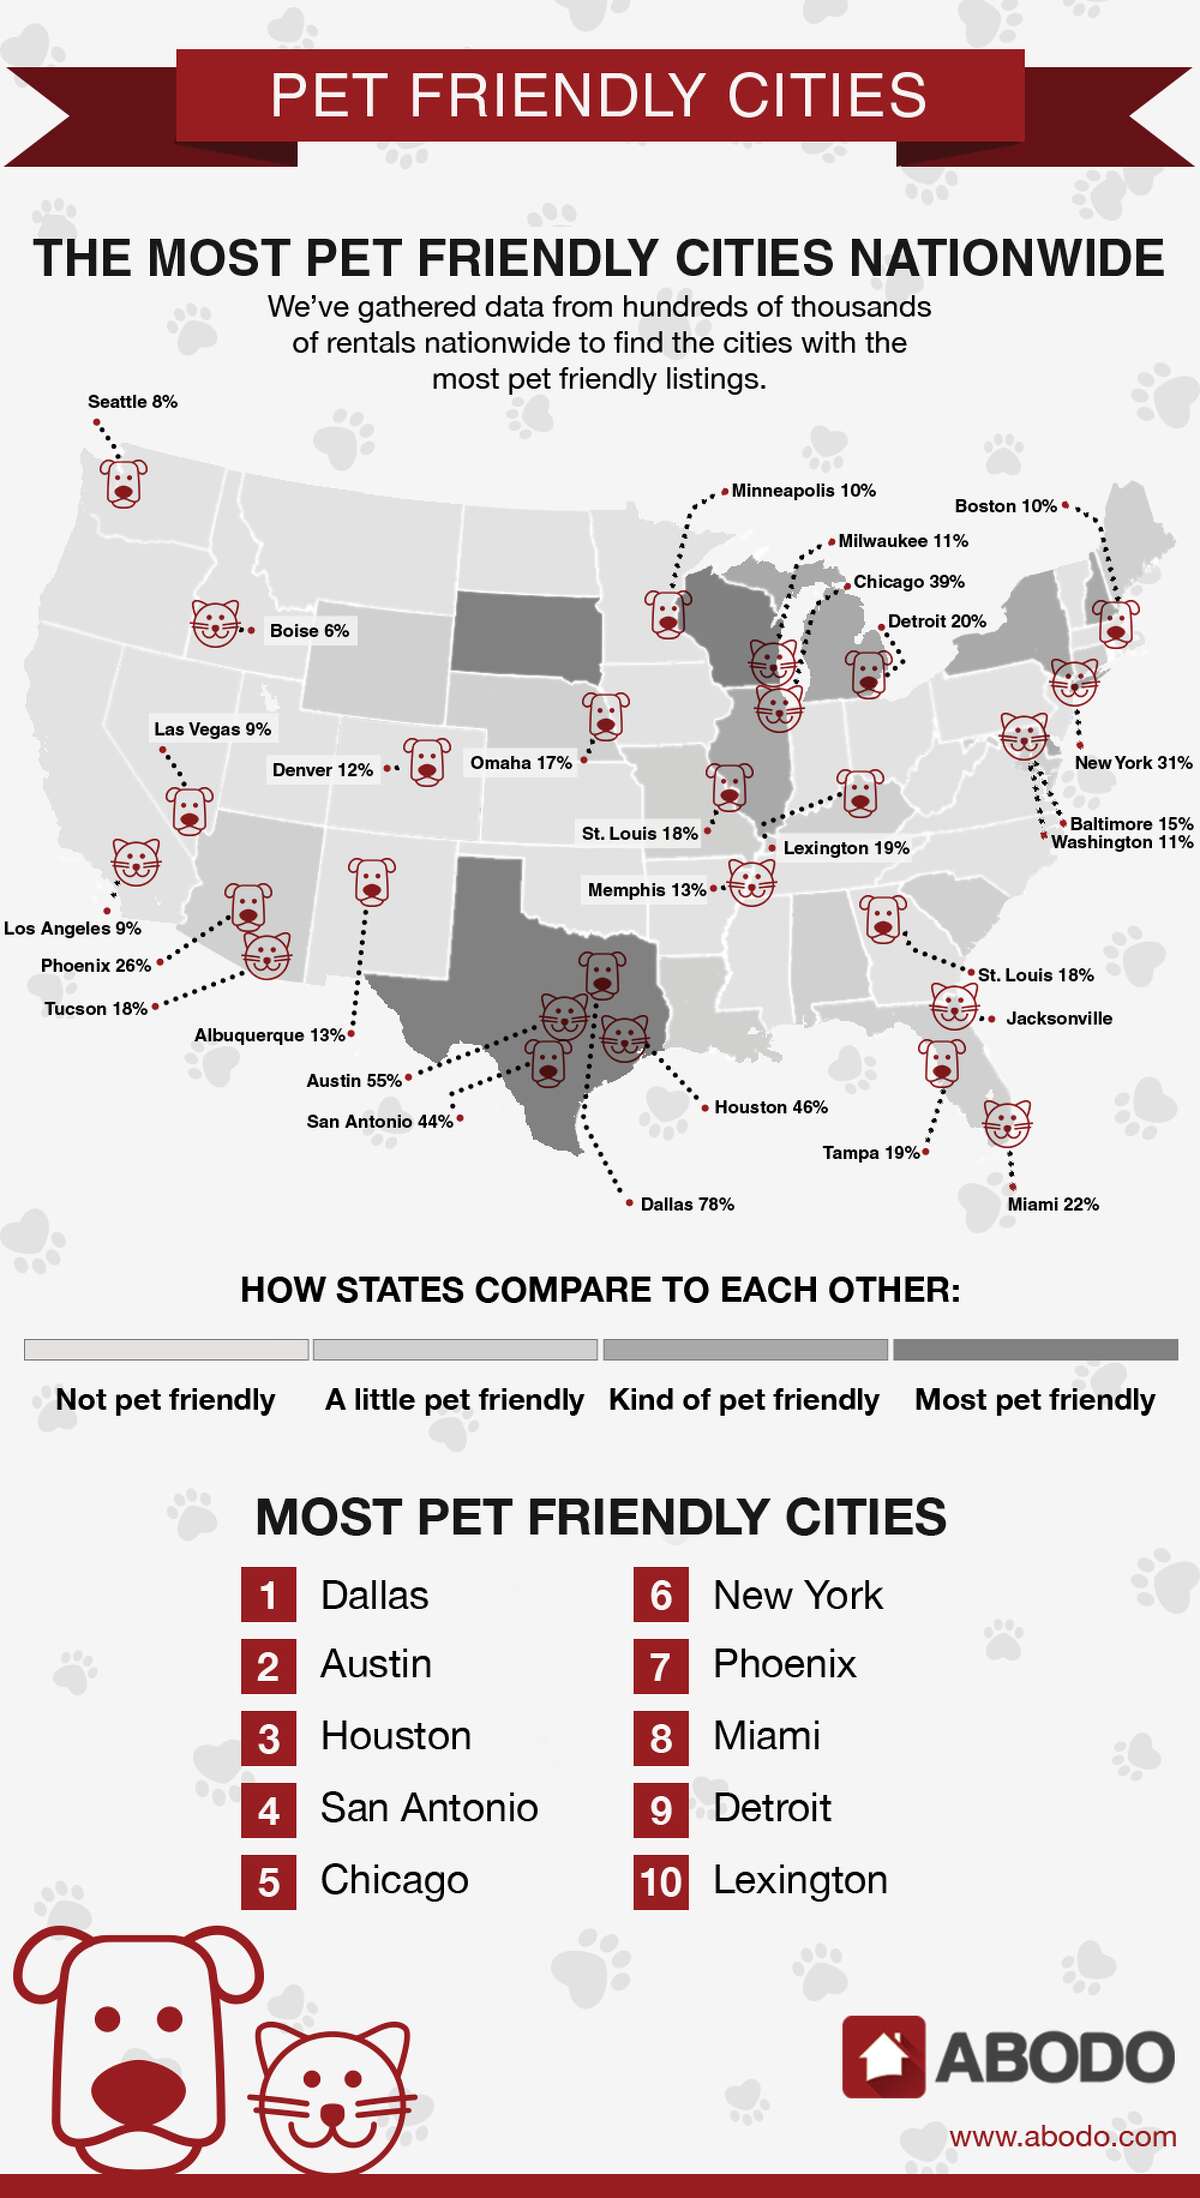 Texas cities dominate for pet friendly apartment rentals 11:53 am, Thursday, February 11, 2016 The most pet friendly cities in America for renters, according to Abodo. The most pet friendly cities in America for renters, according to Abodo.